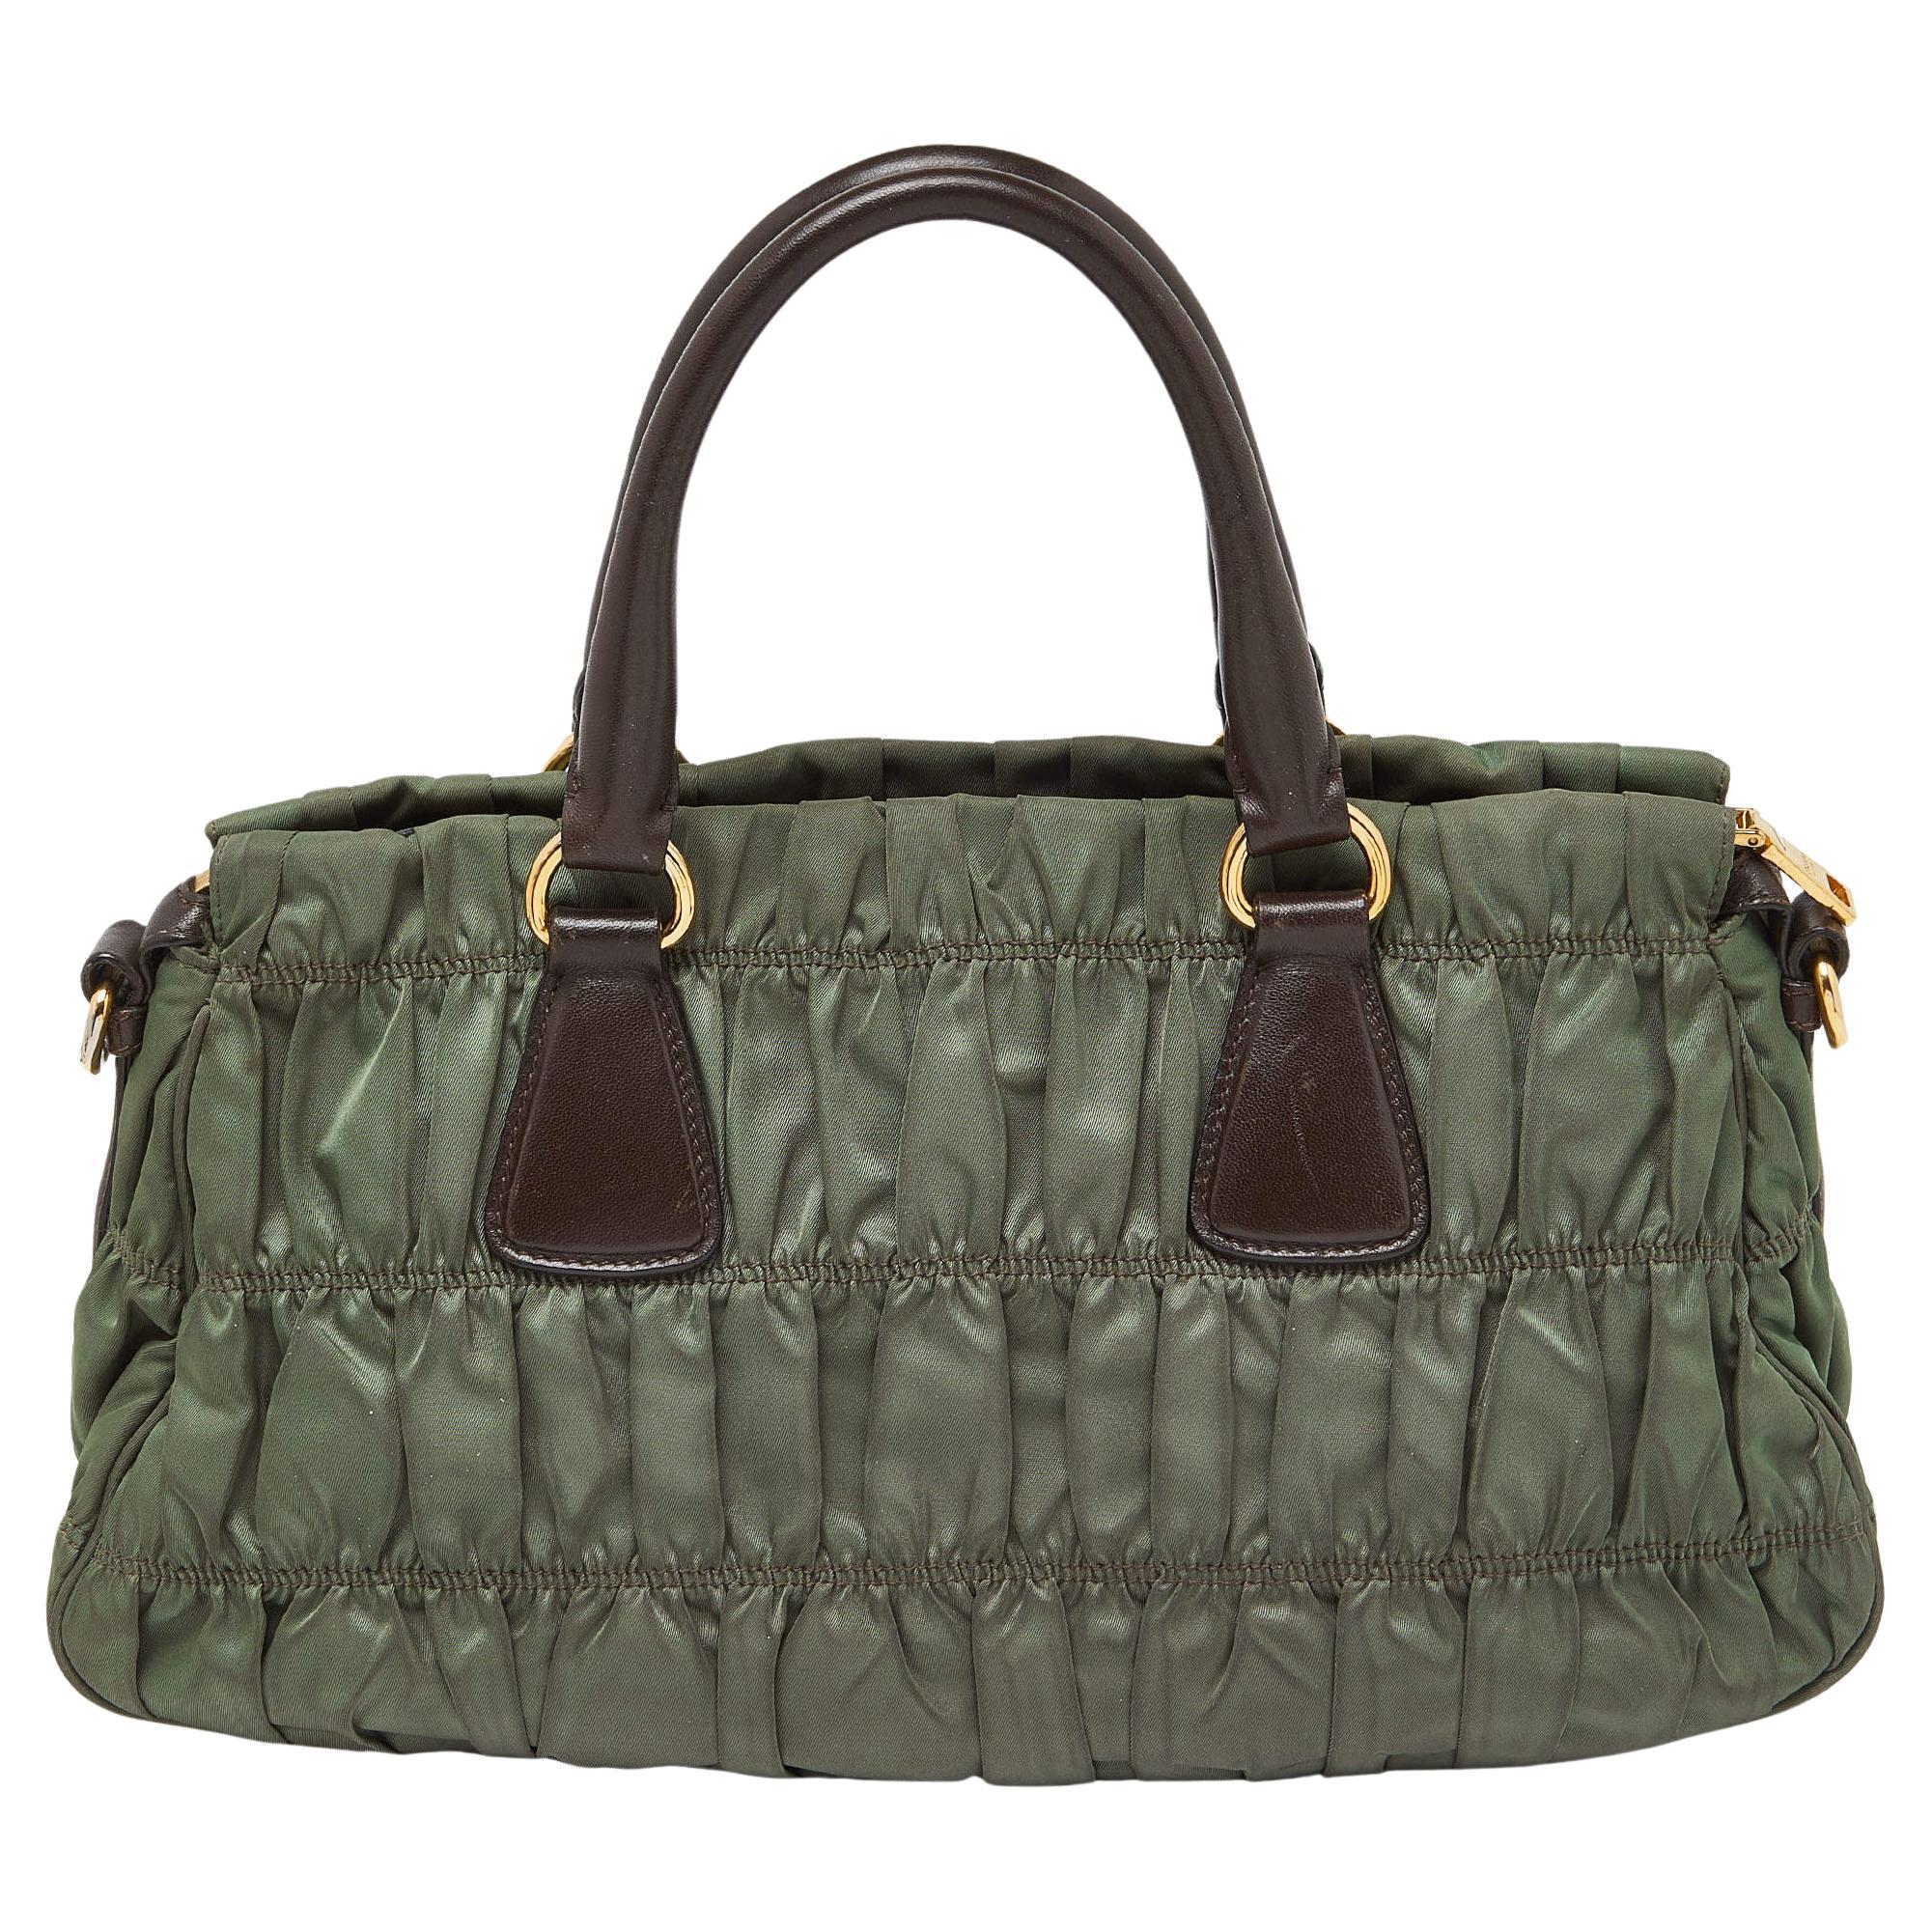 Women's Prada Green/Brown Gaufre Nylon and Leather Tote For Sale